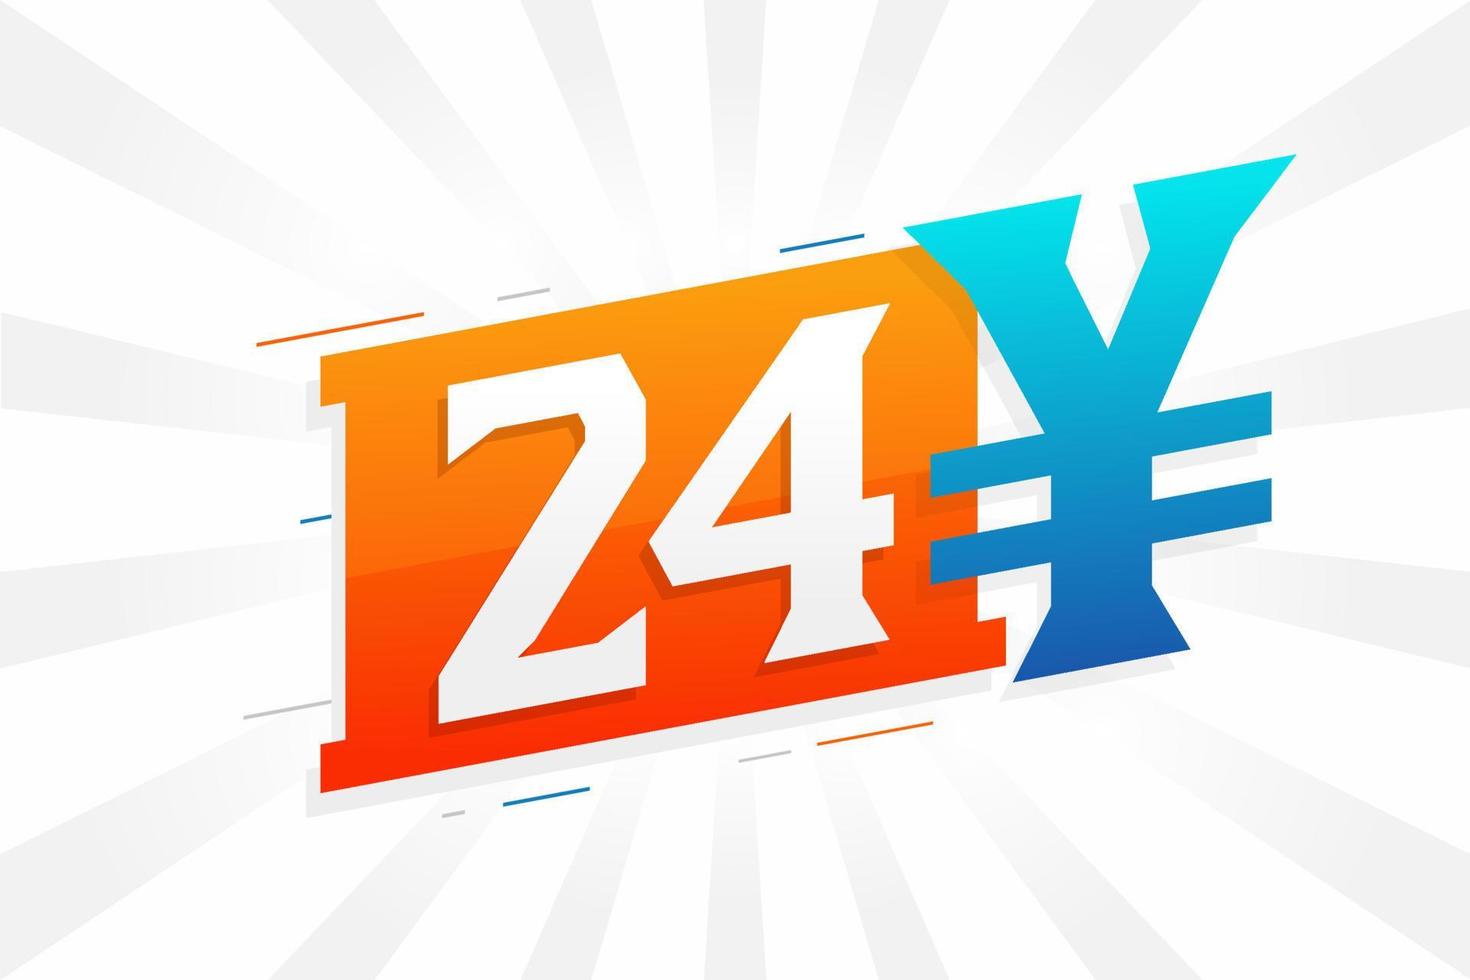 24 Yuan Chinese currency vector text symbol. 24 Yen Japanese currency Money stock vector